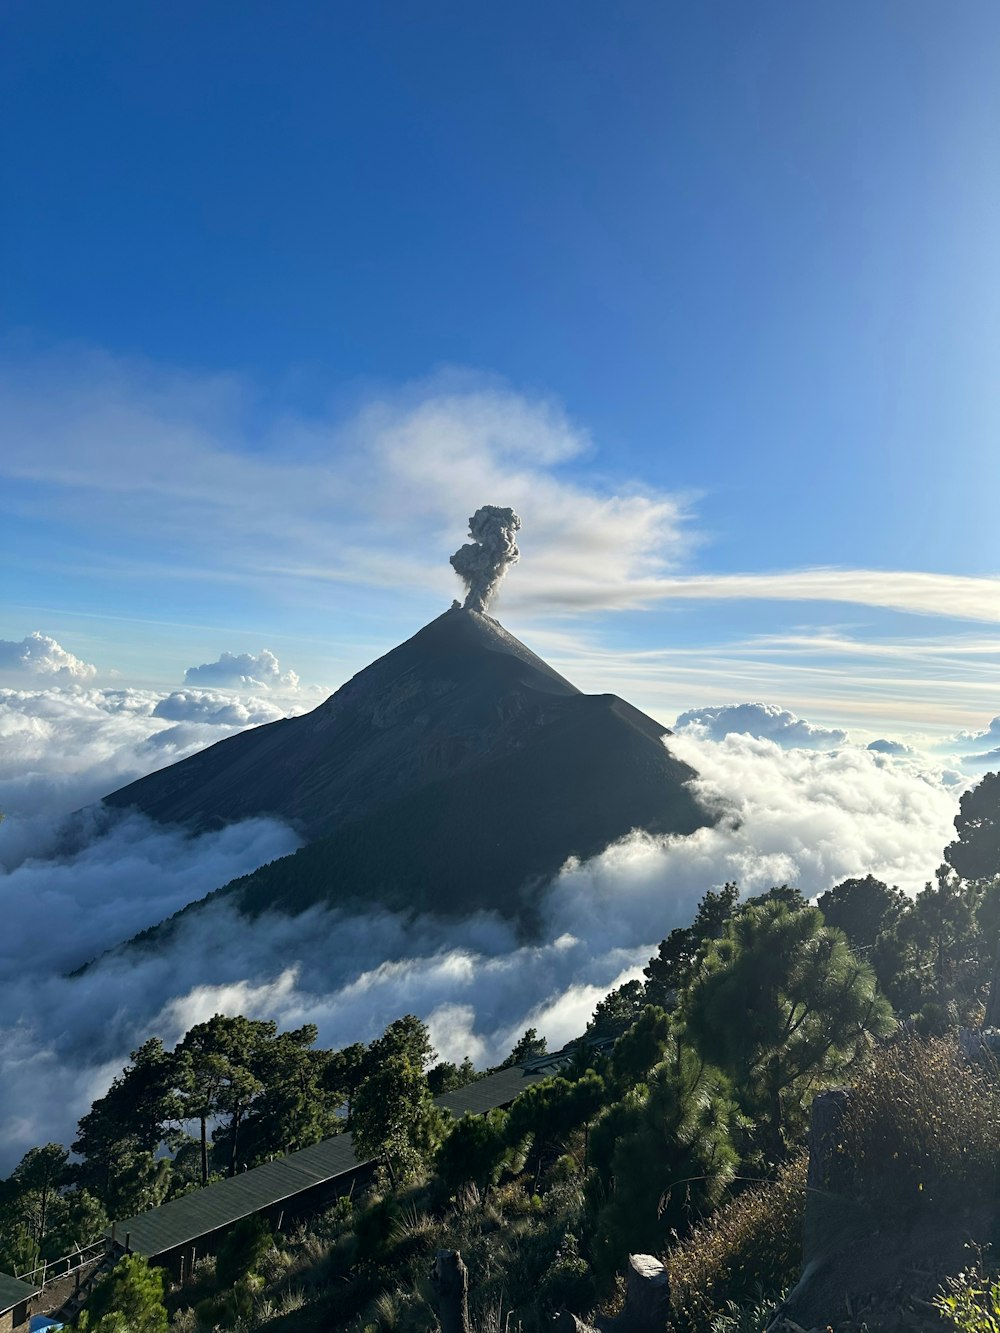 a view of a mountain with a cloud of smoke coming out of the top